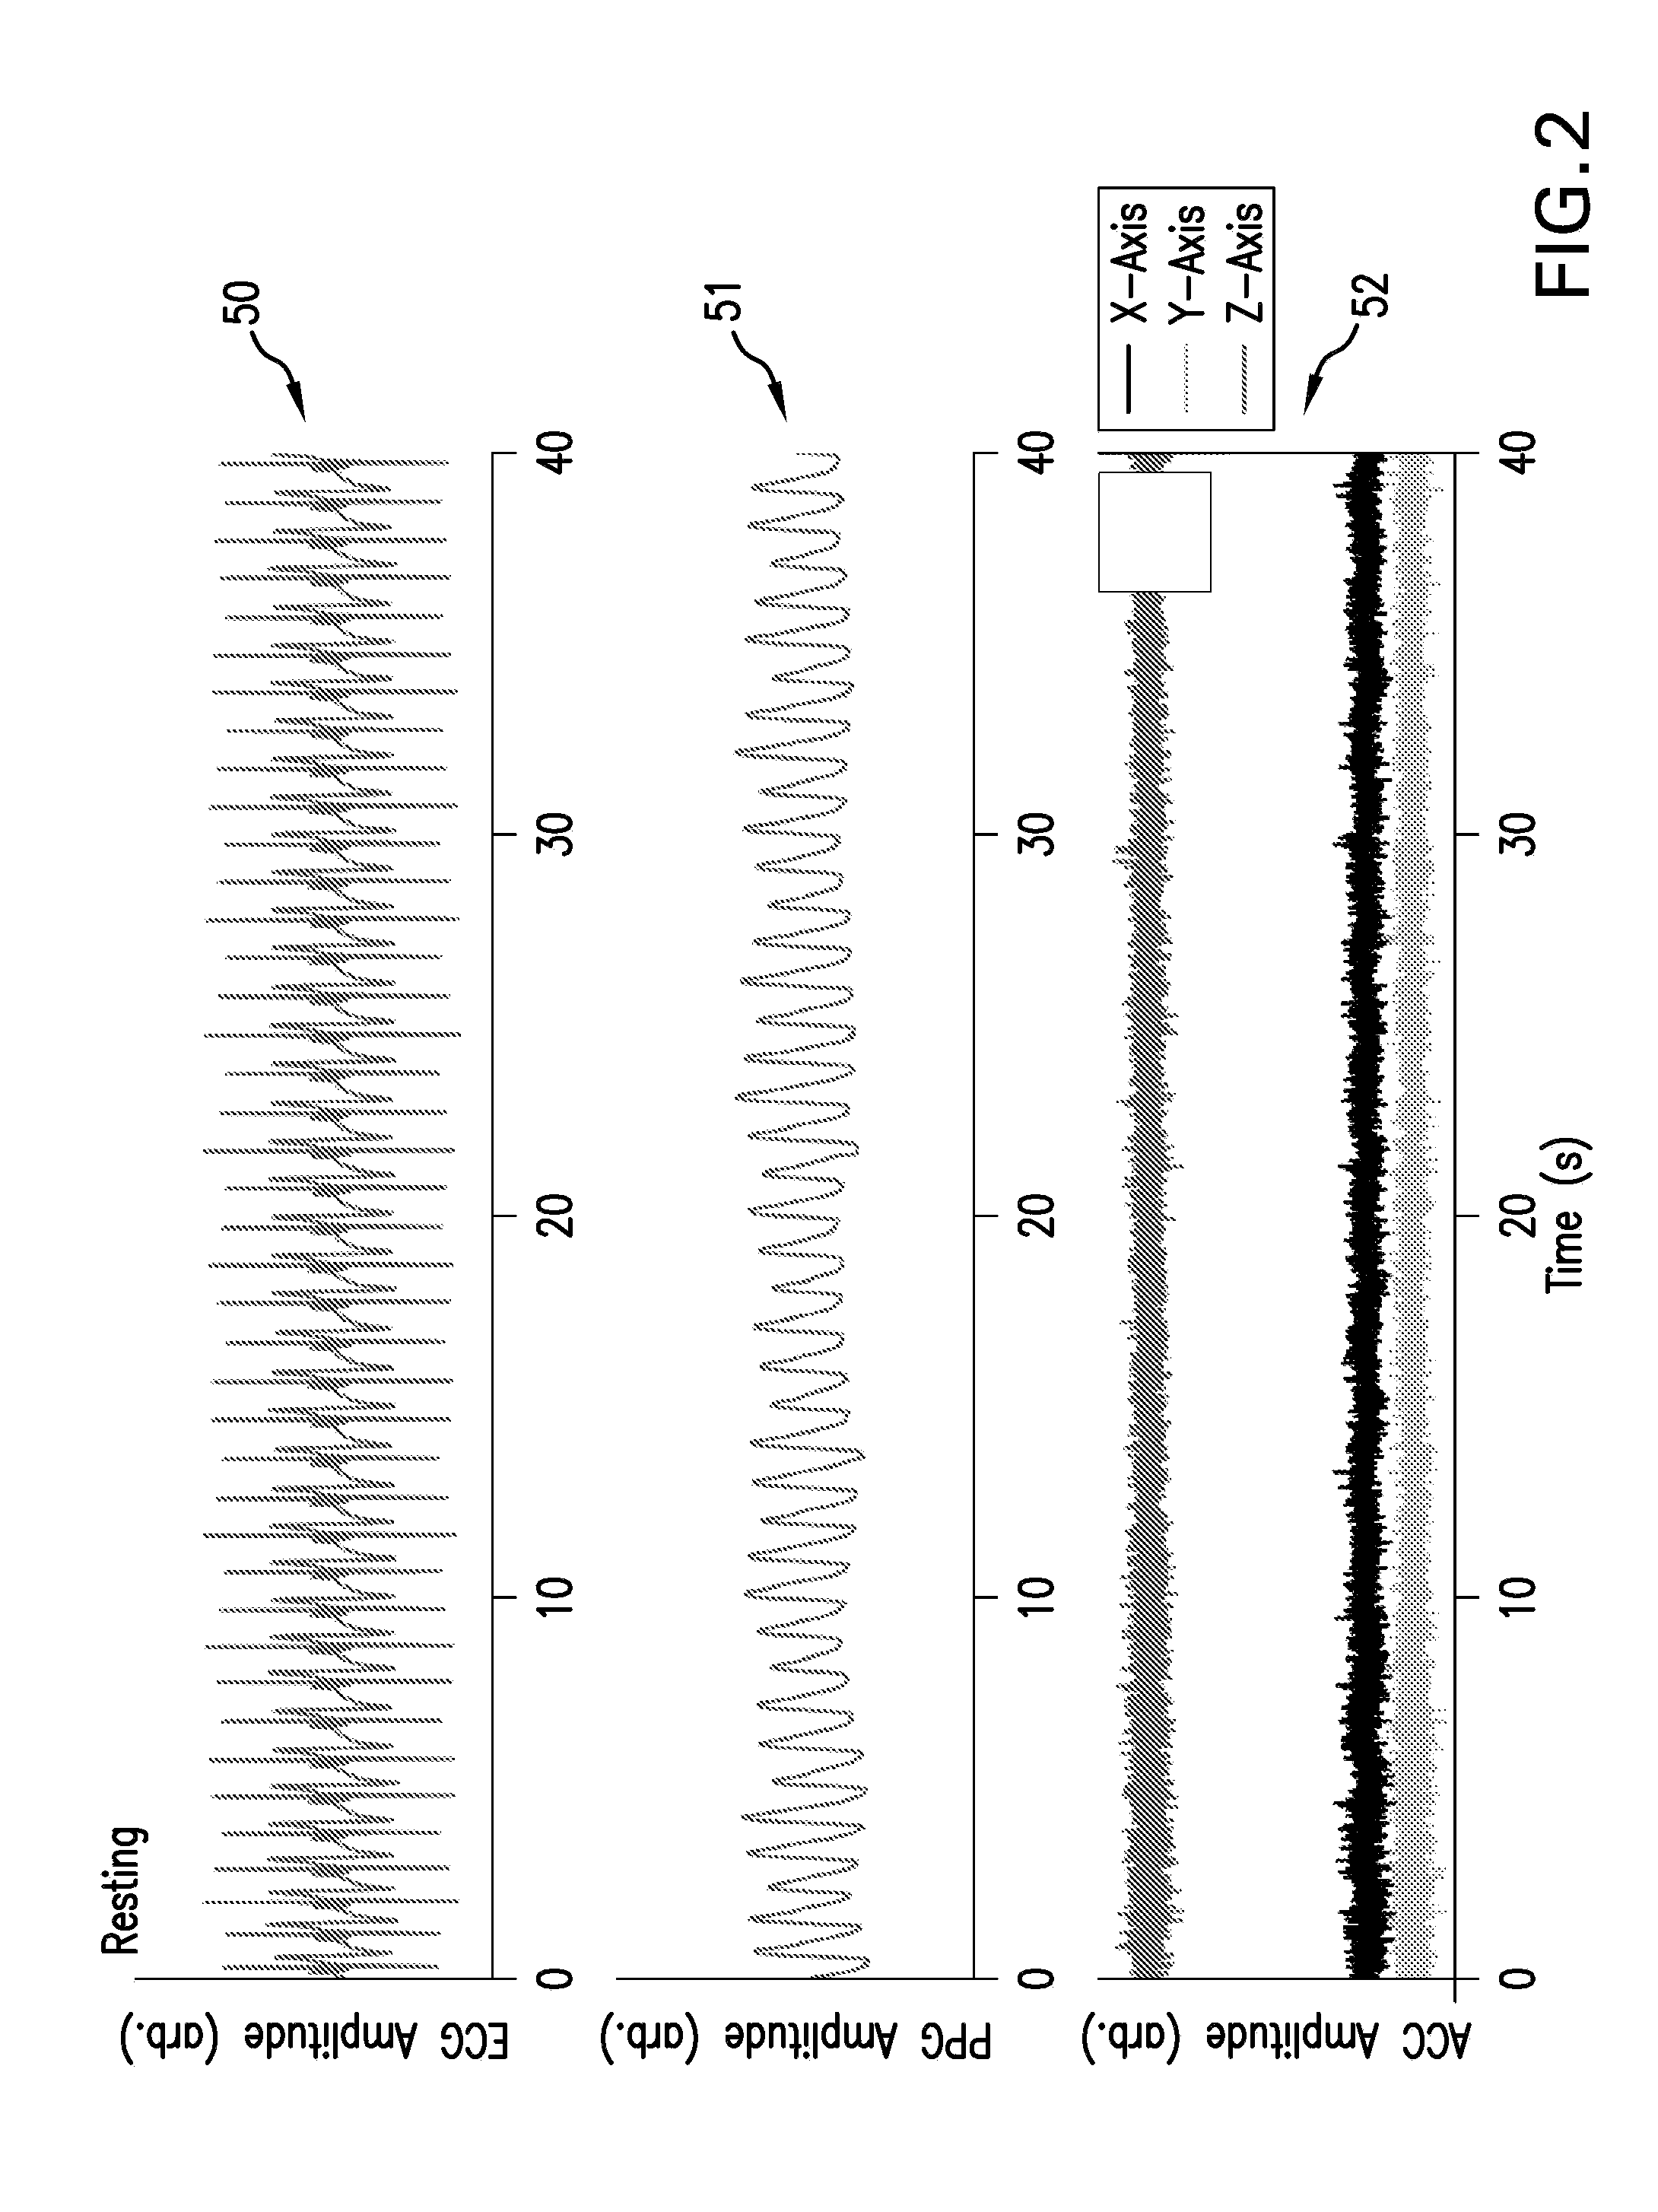 Method for continuously monitoring a patient using a body-worn device and associated system for alarms/alerts